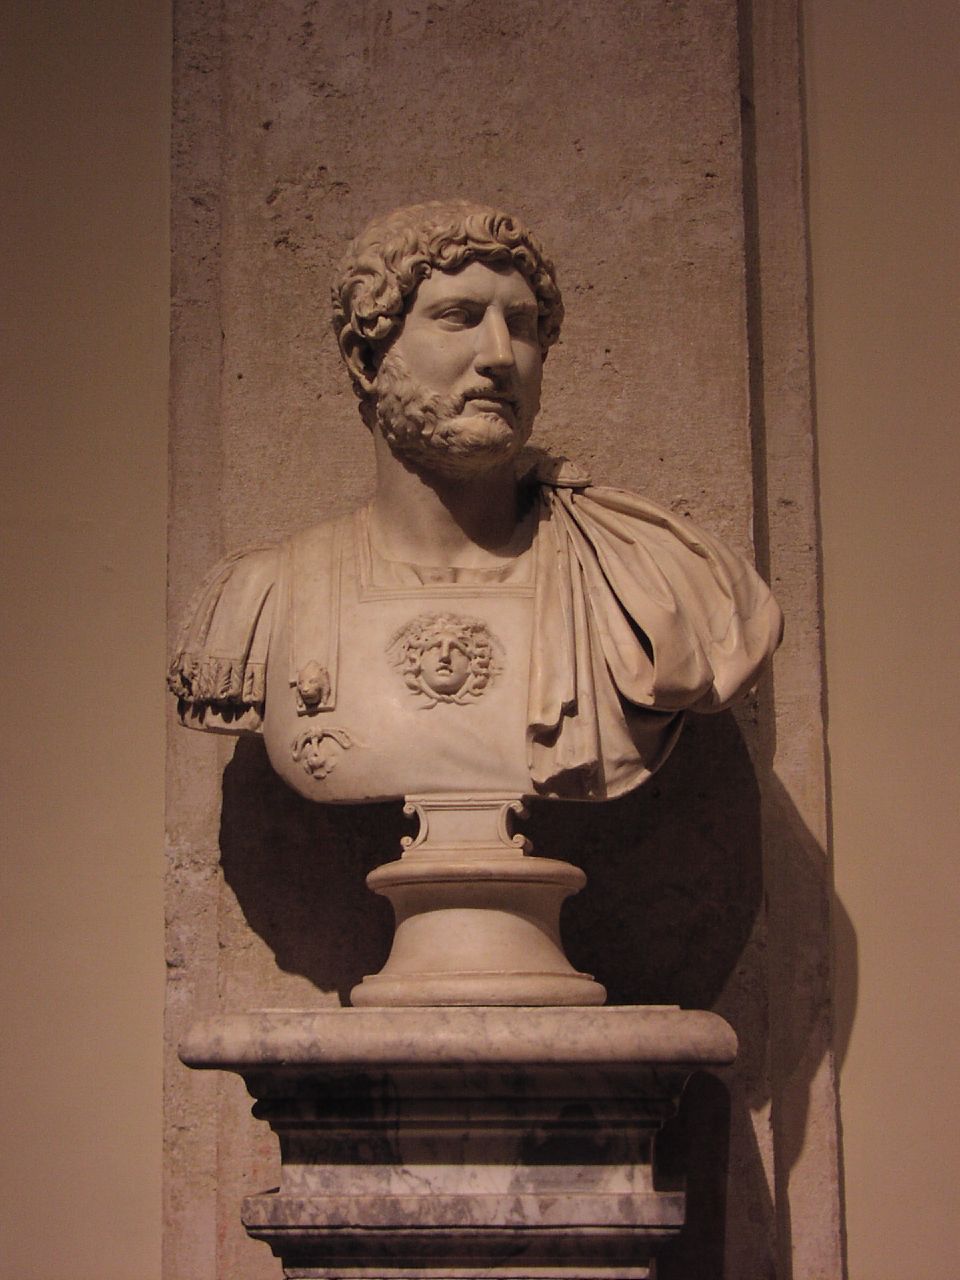 How Did Hadrian Become Emperor